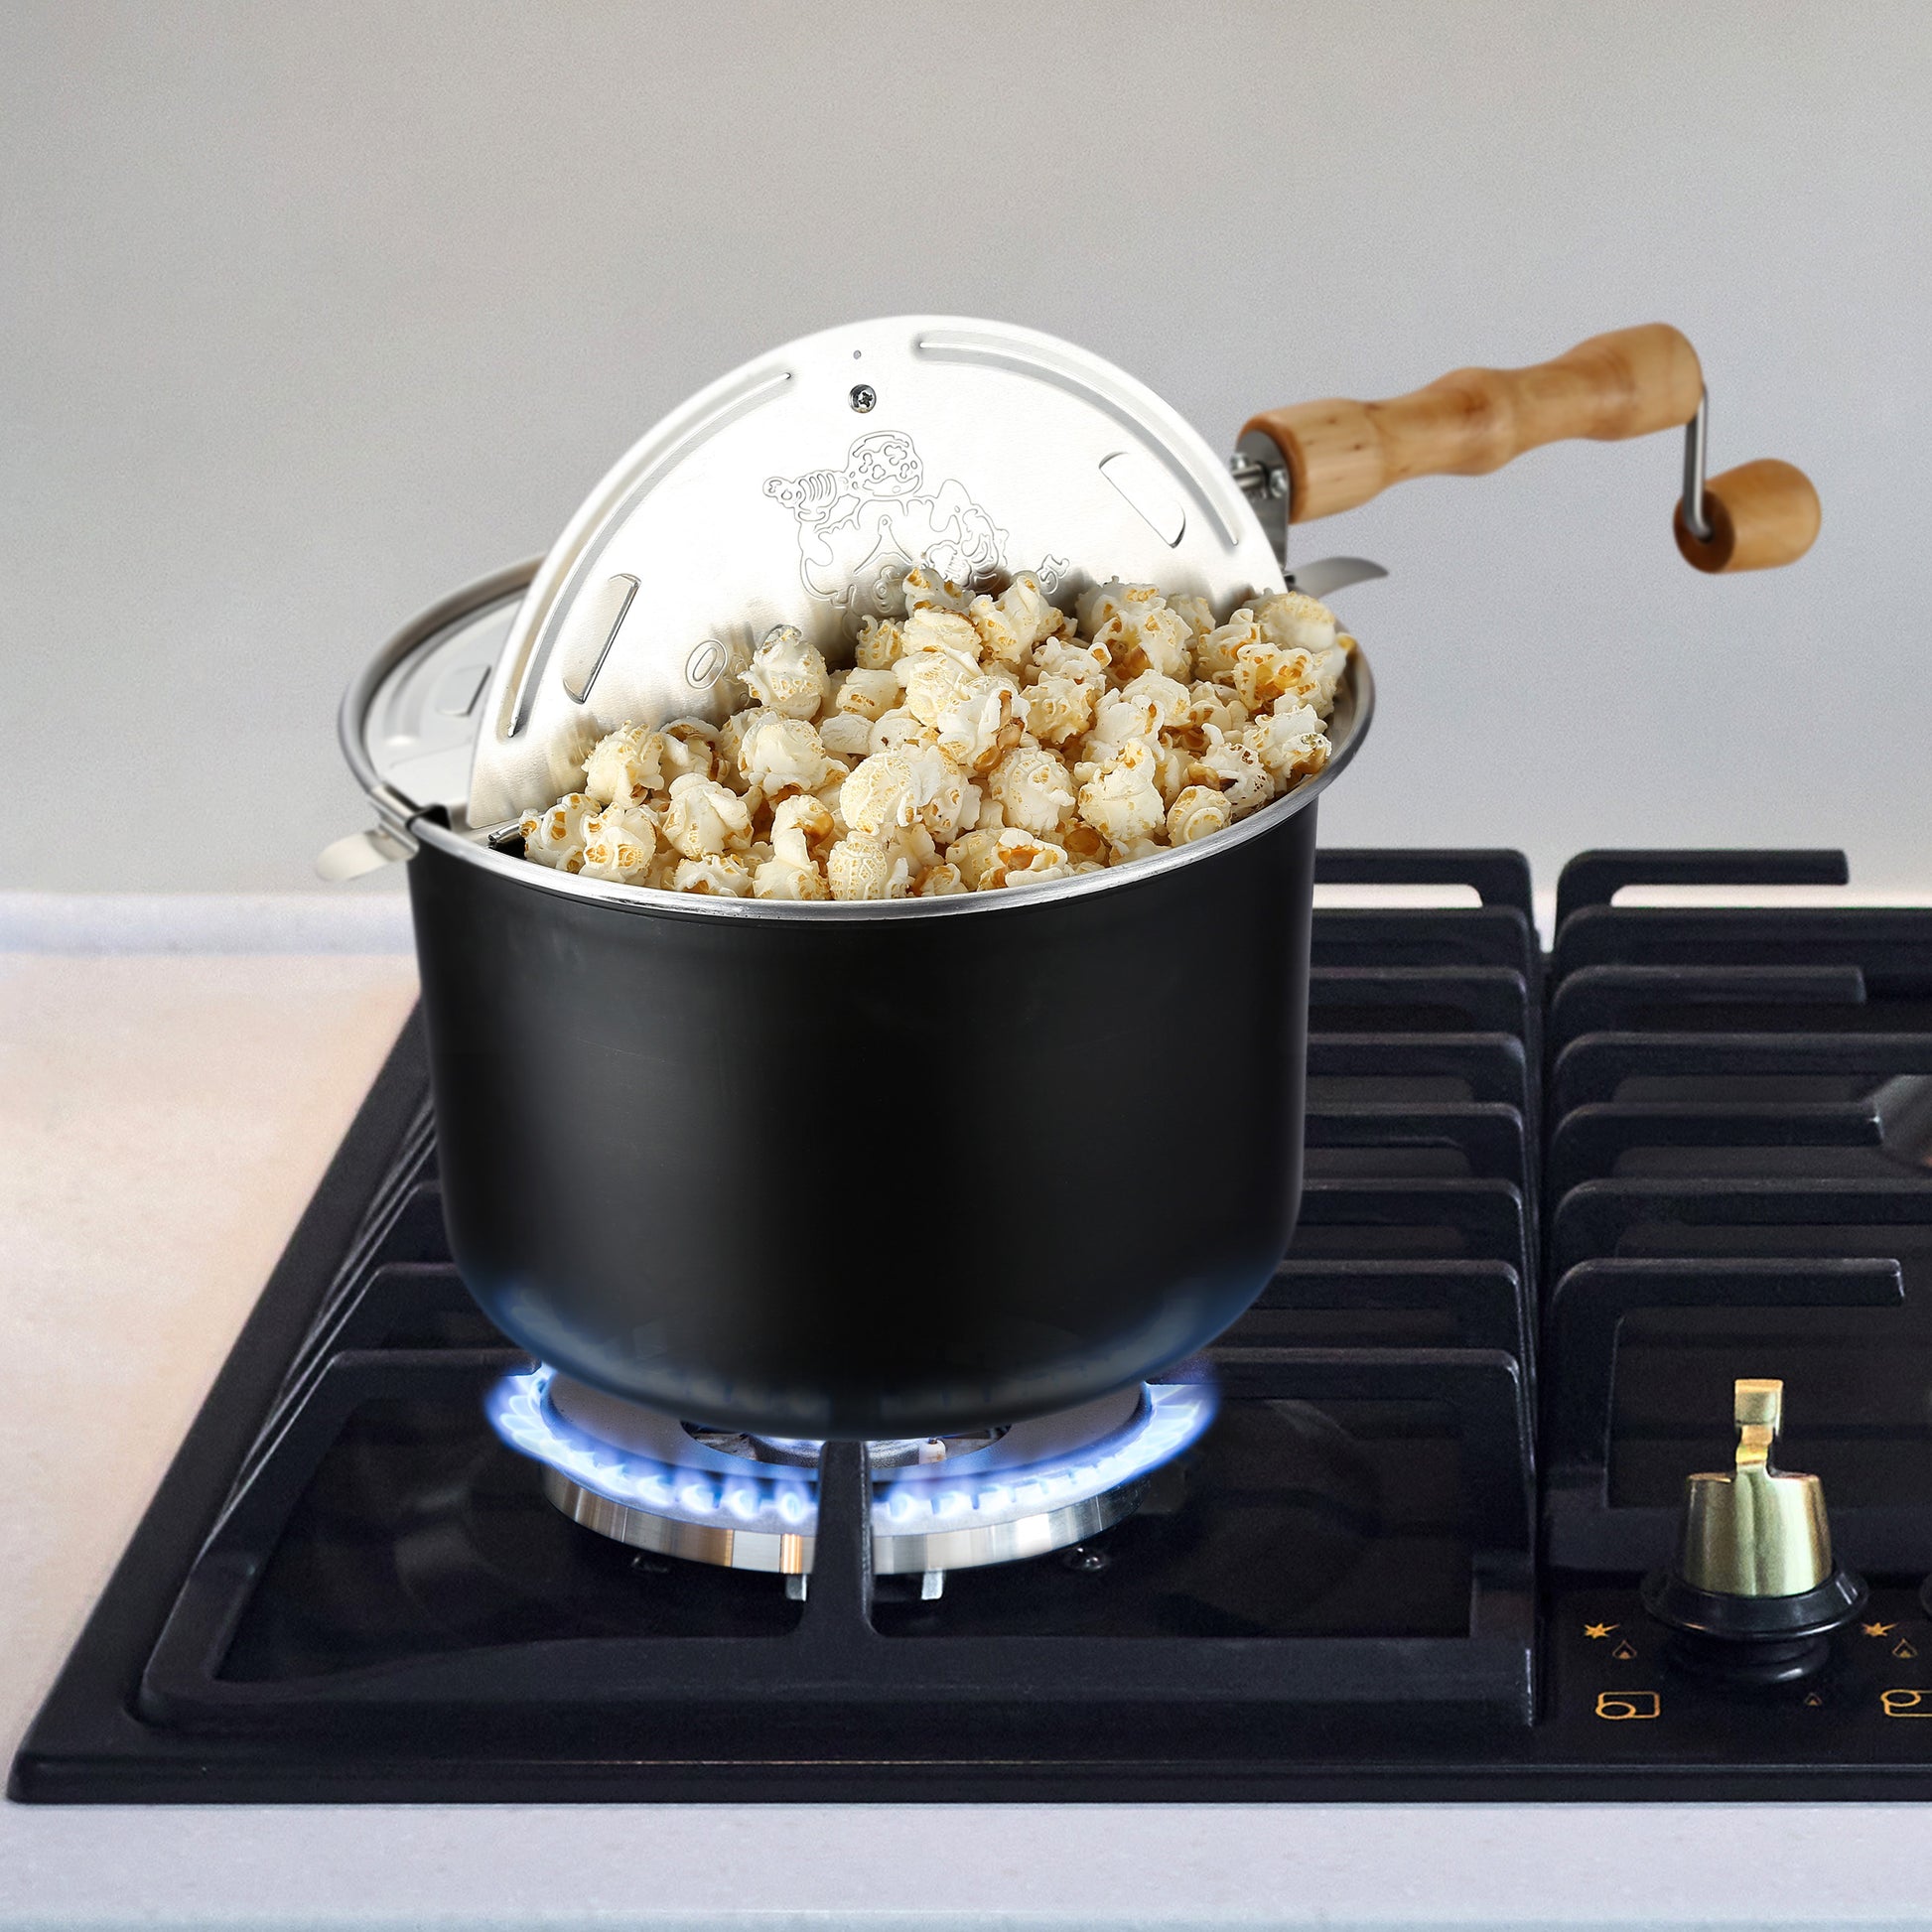 Stove Top Popcorn Maker 6.5-Quart Stainless-Steel Popper with Hand Crank Set Includes 7lbs of Popping Corn Kernels by Great Northern Popcorn